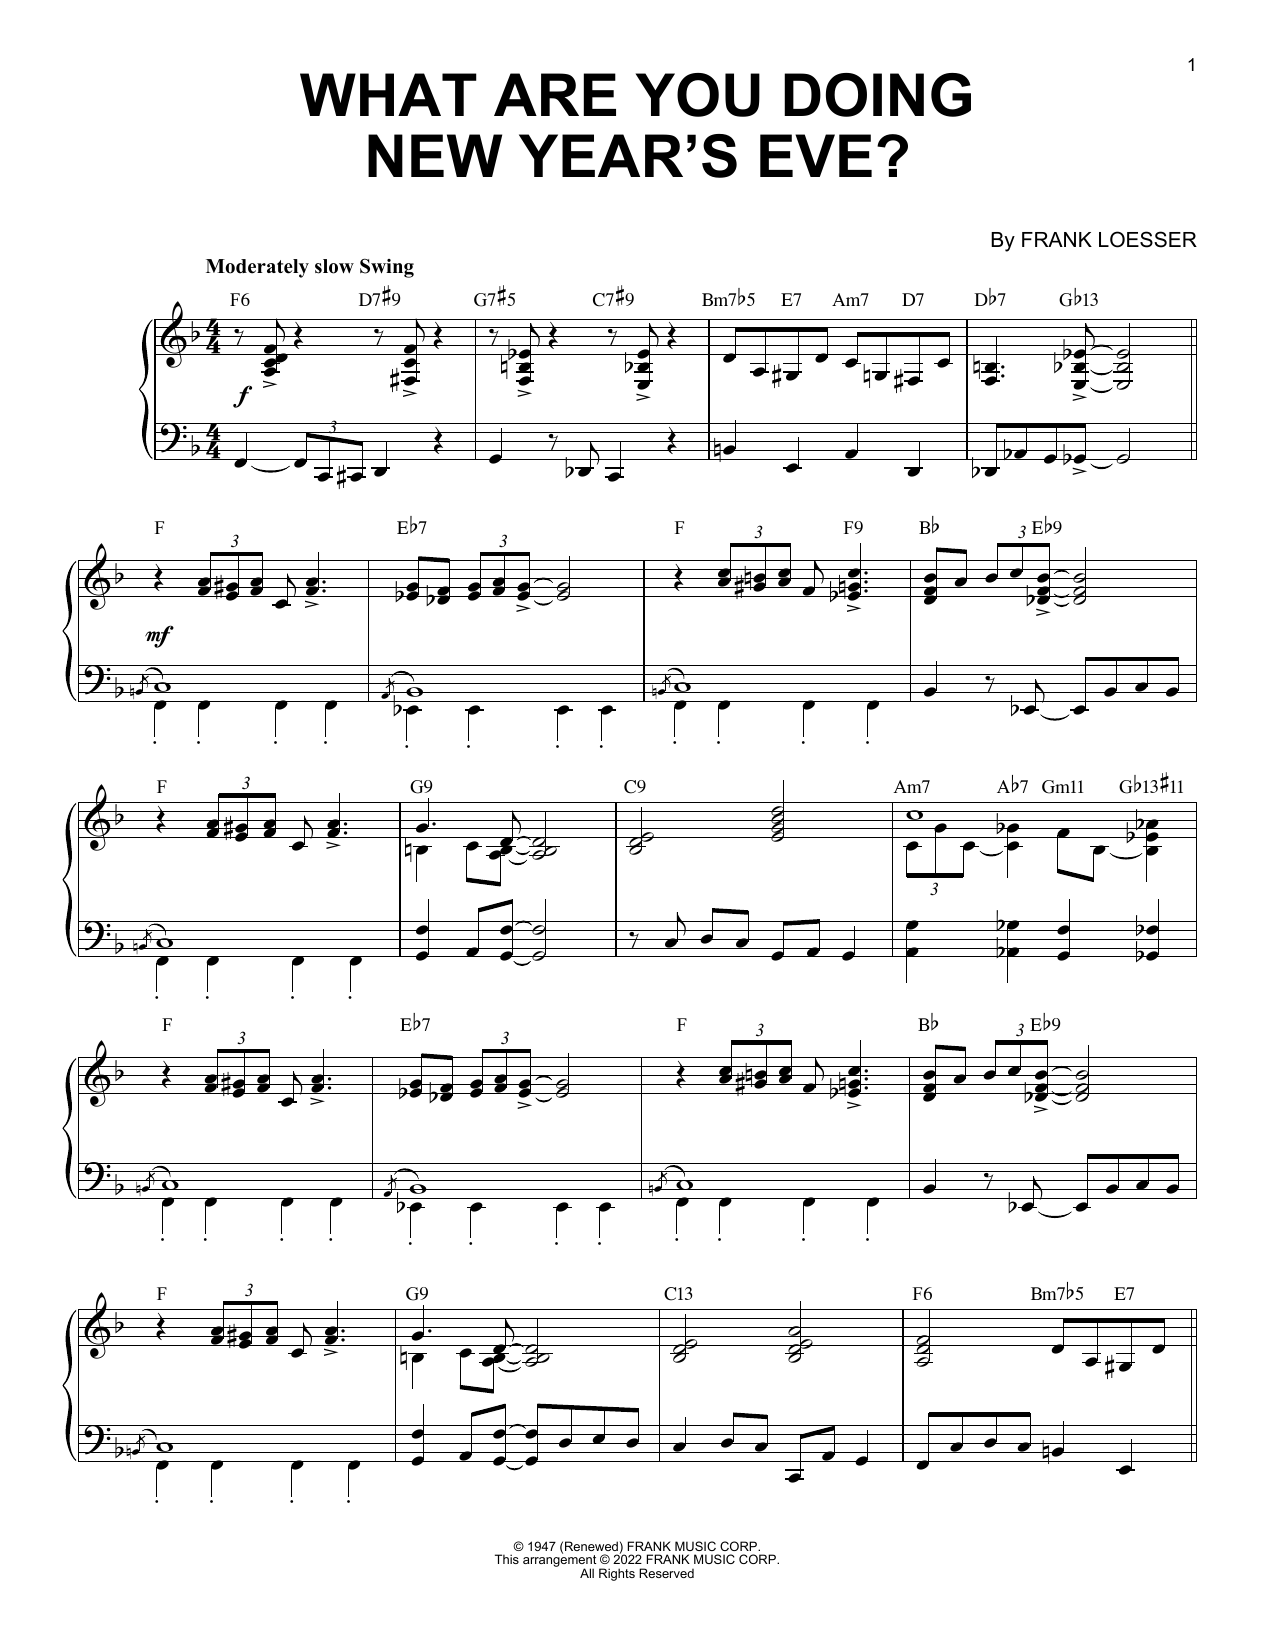 Download Frank Loesser What Are You Doing New Year's Eve? (arr Sheet Music